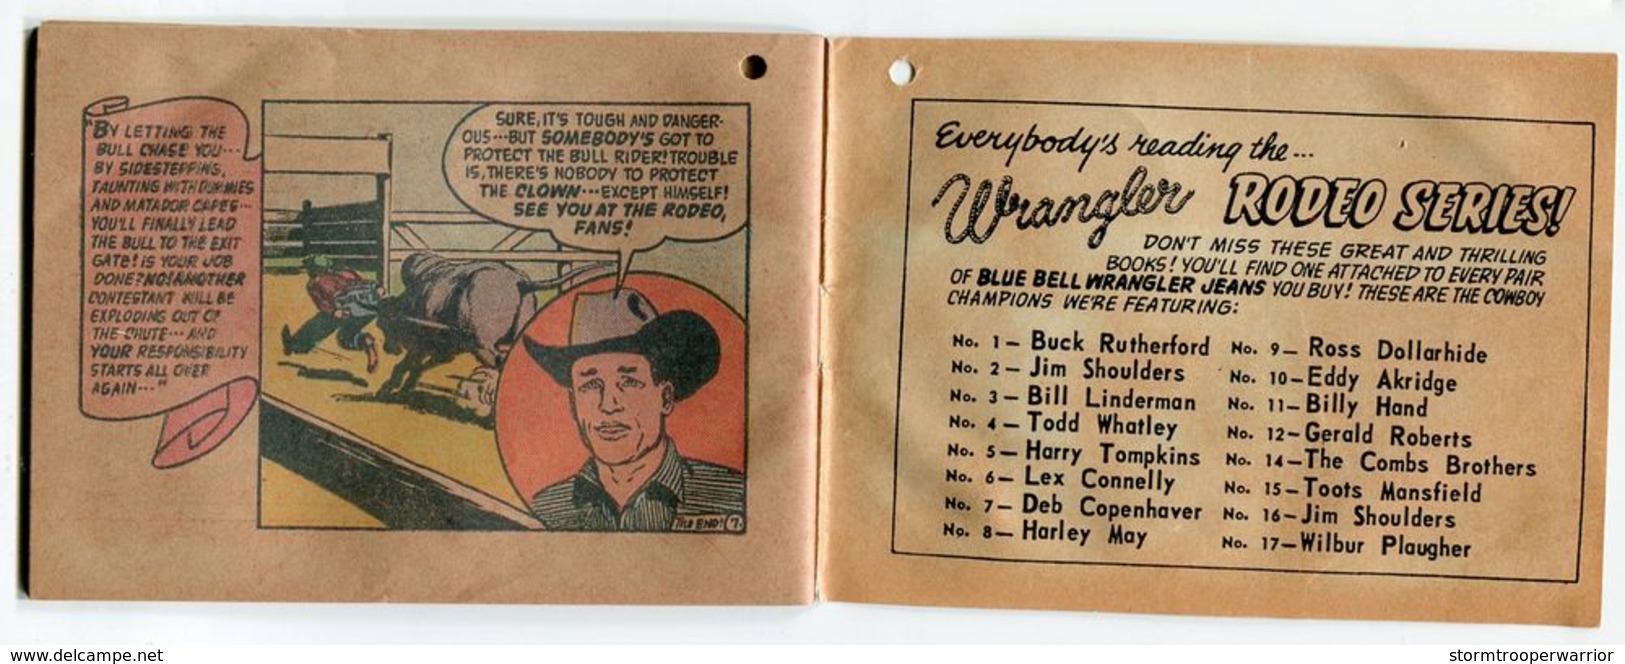 USA - WRANGLER RODEO SERIES By Blue Bell - N°15 -  STARRING Toots Mansfield - Other Publishers